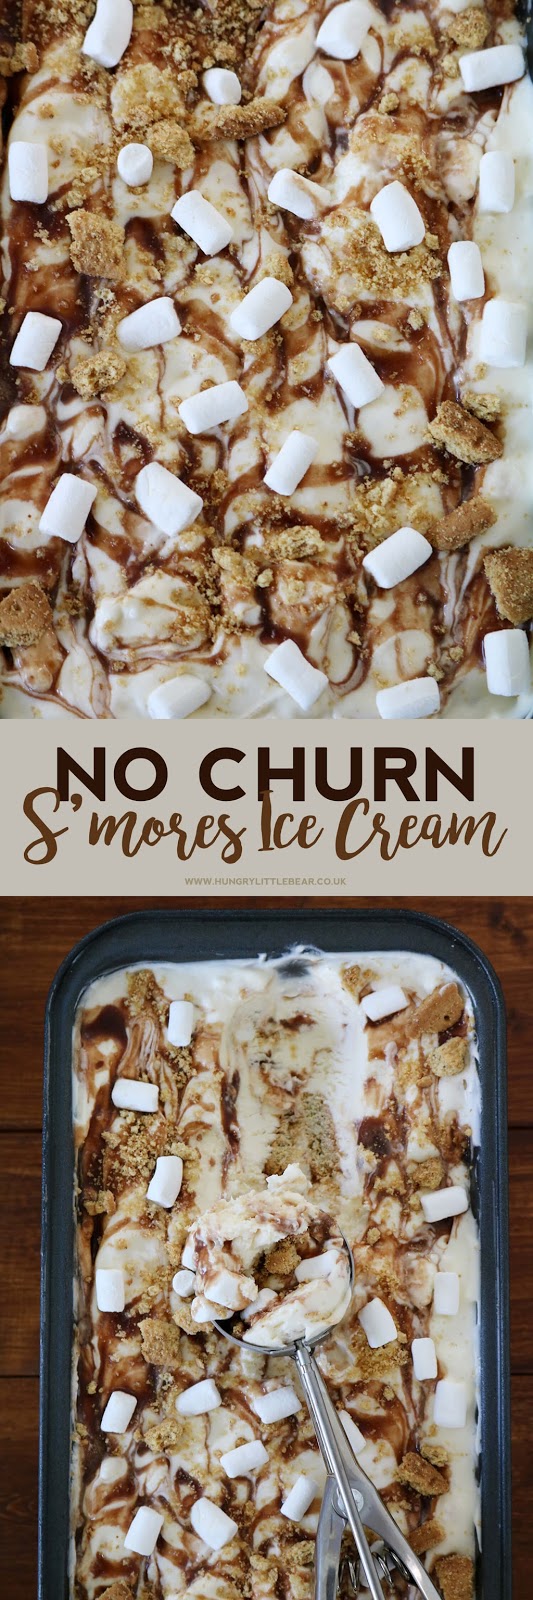 No Churn S'mores Ice Cream | Hungry Little Bear